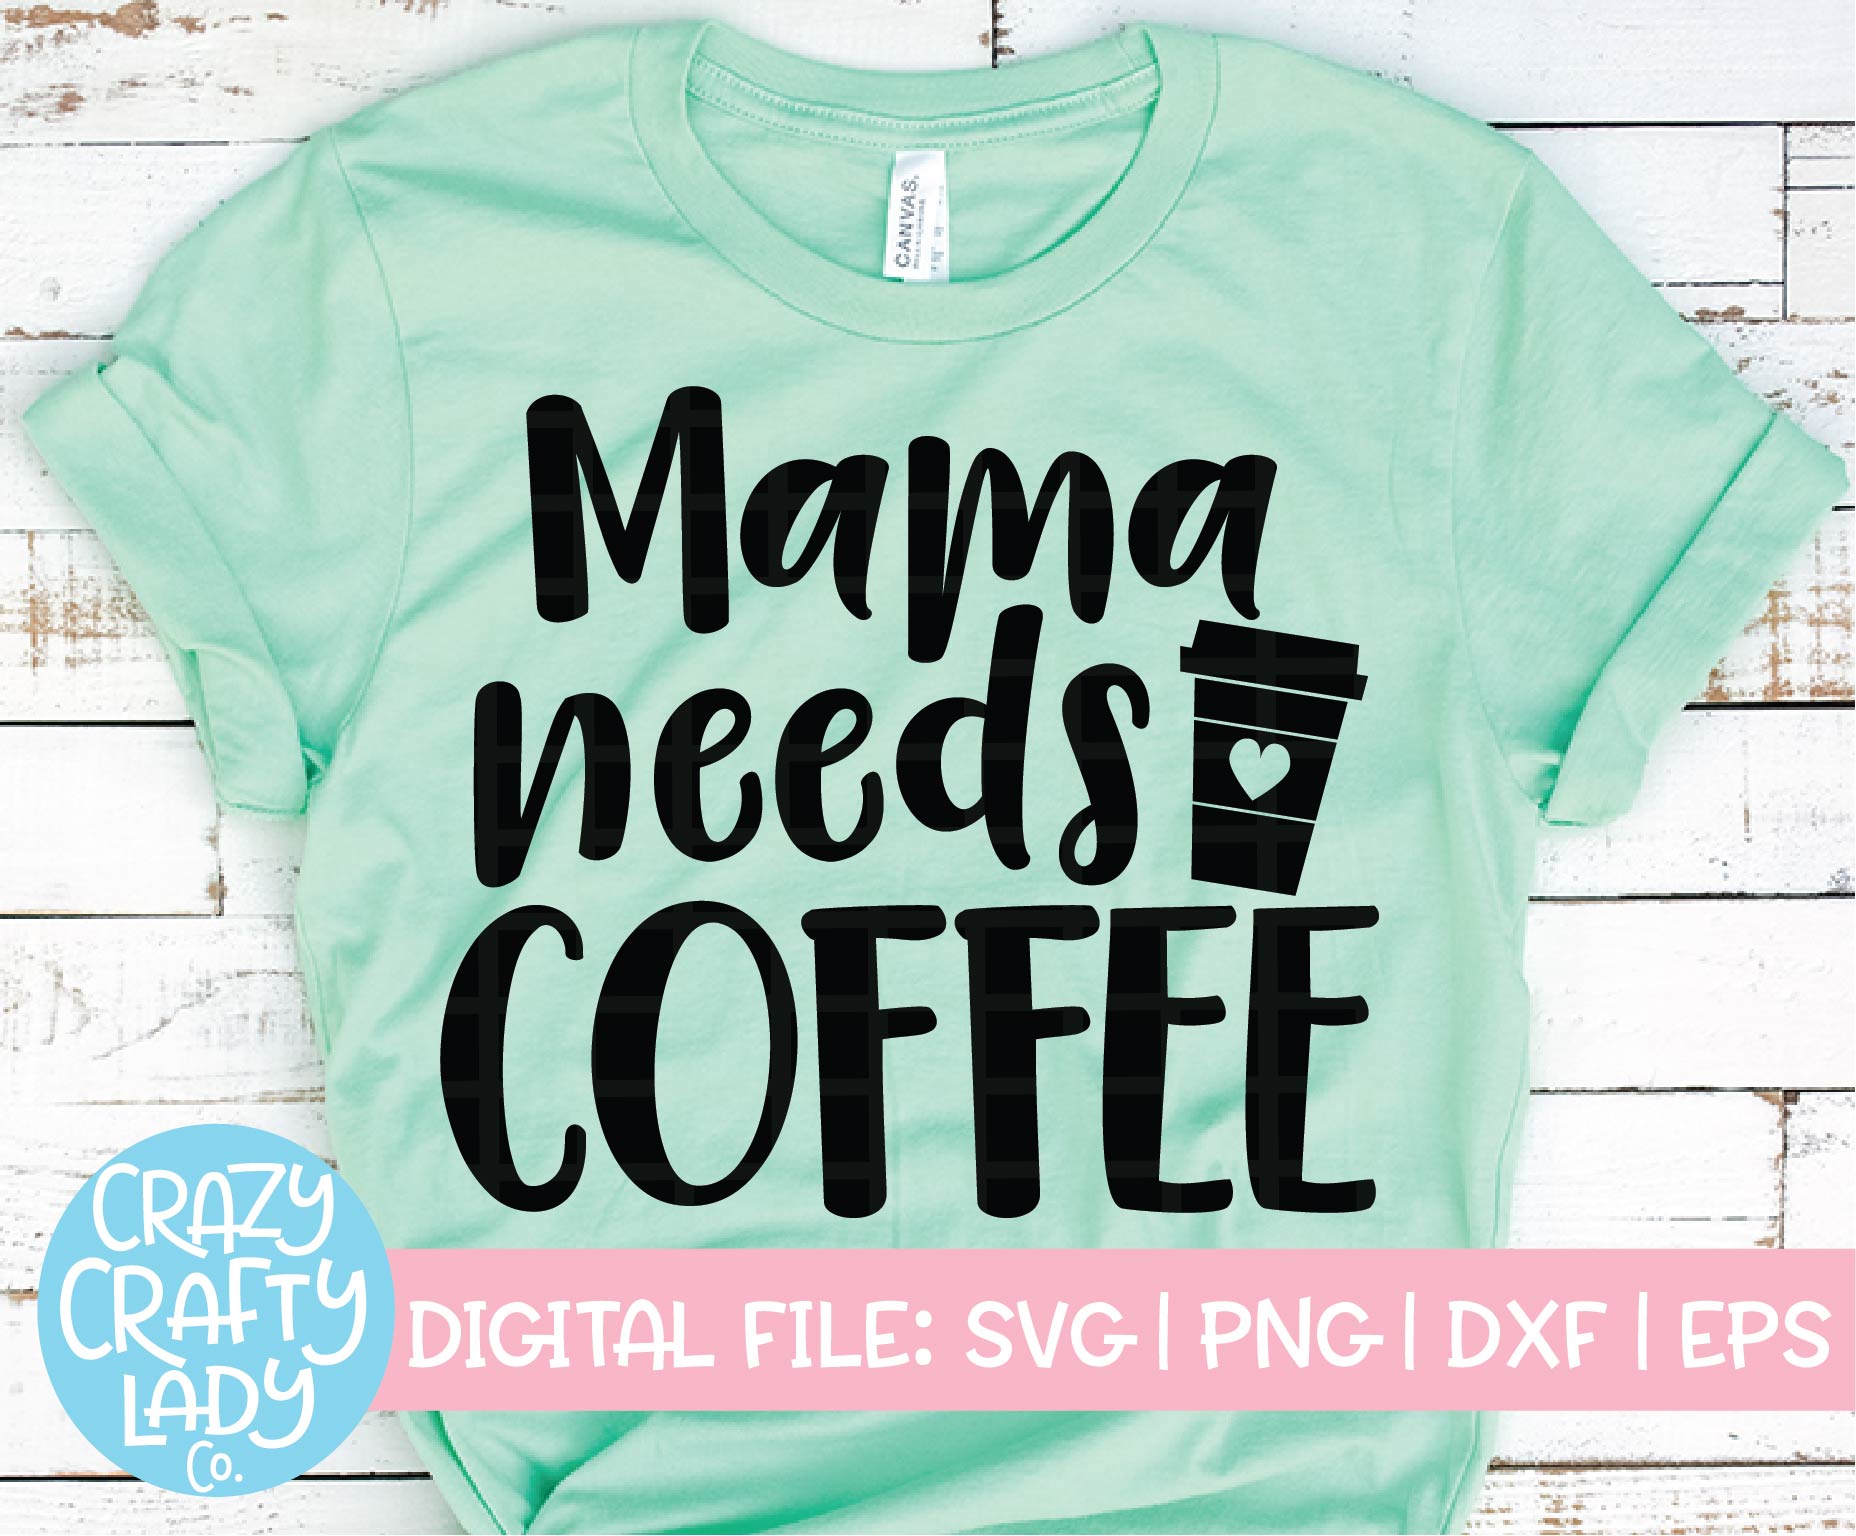 Download Mama Needs Coffee Svg Cut File Crazy Crafty Lady Co